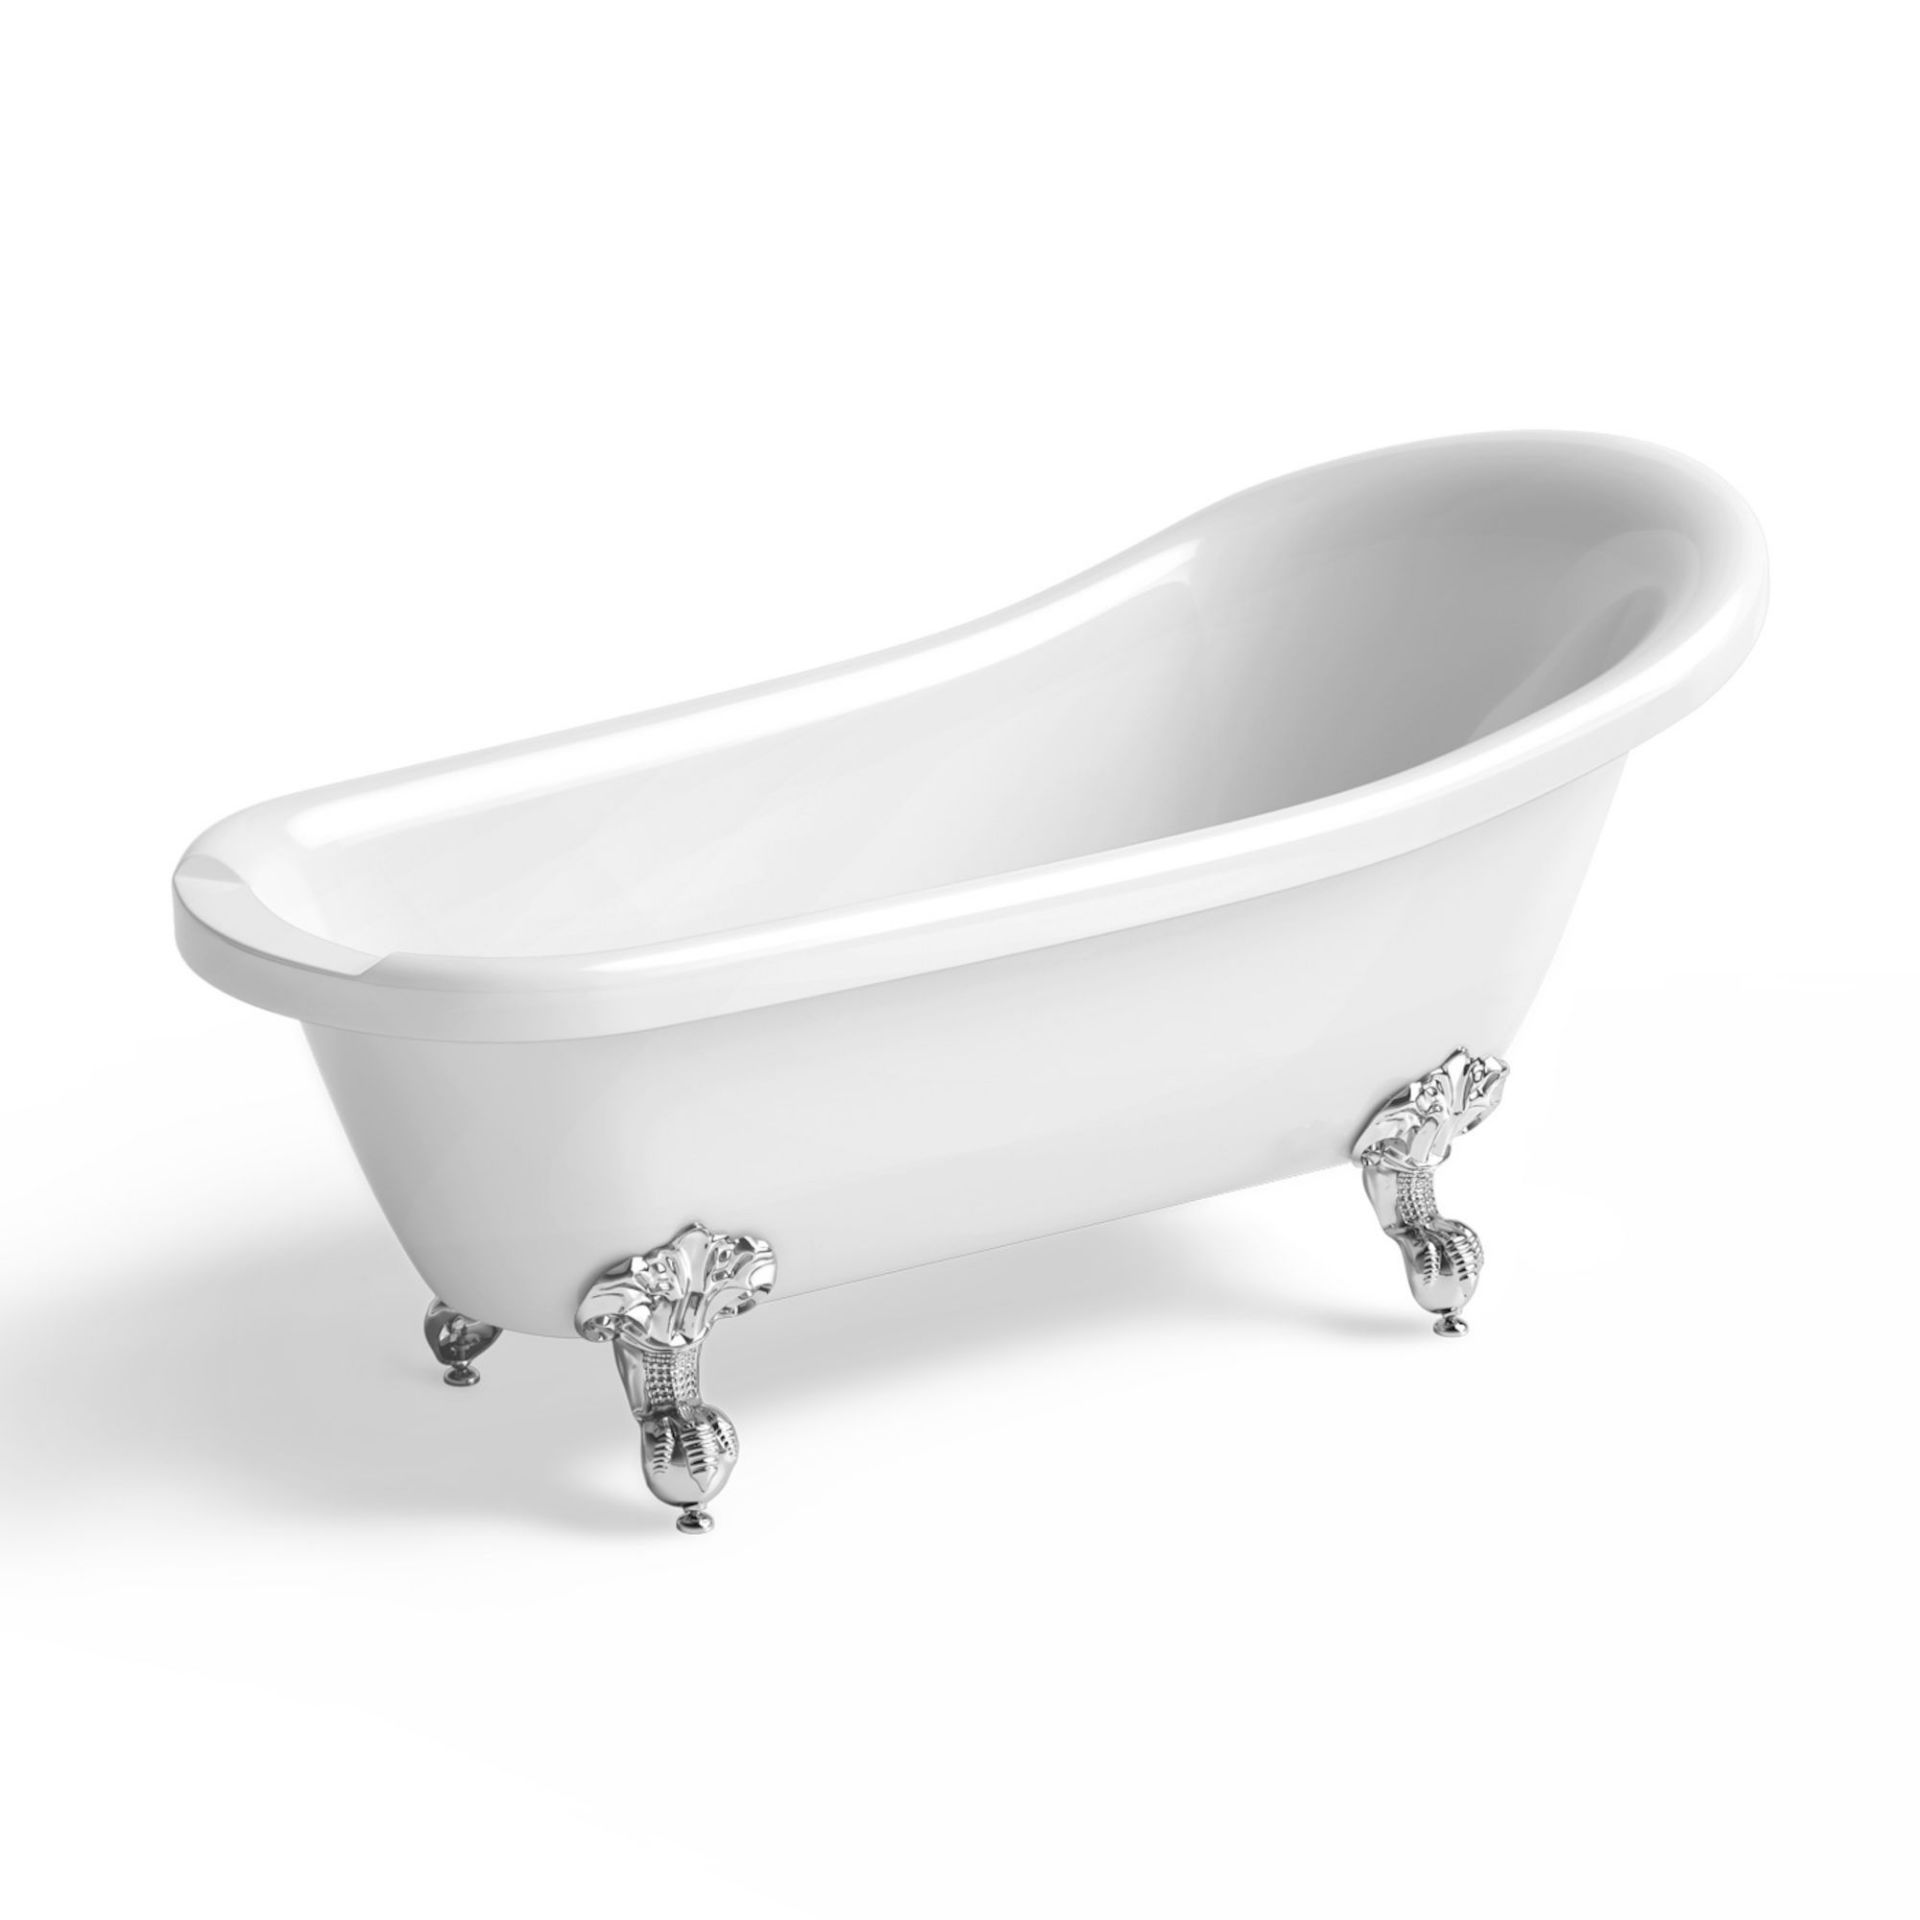 NEW (Z3) 1530mm Traditional Roll Top Slipper Bath -Chrome Feet. Rrp £999.99.Bath Manufactured From